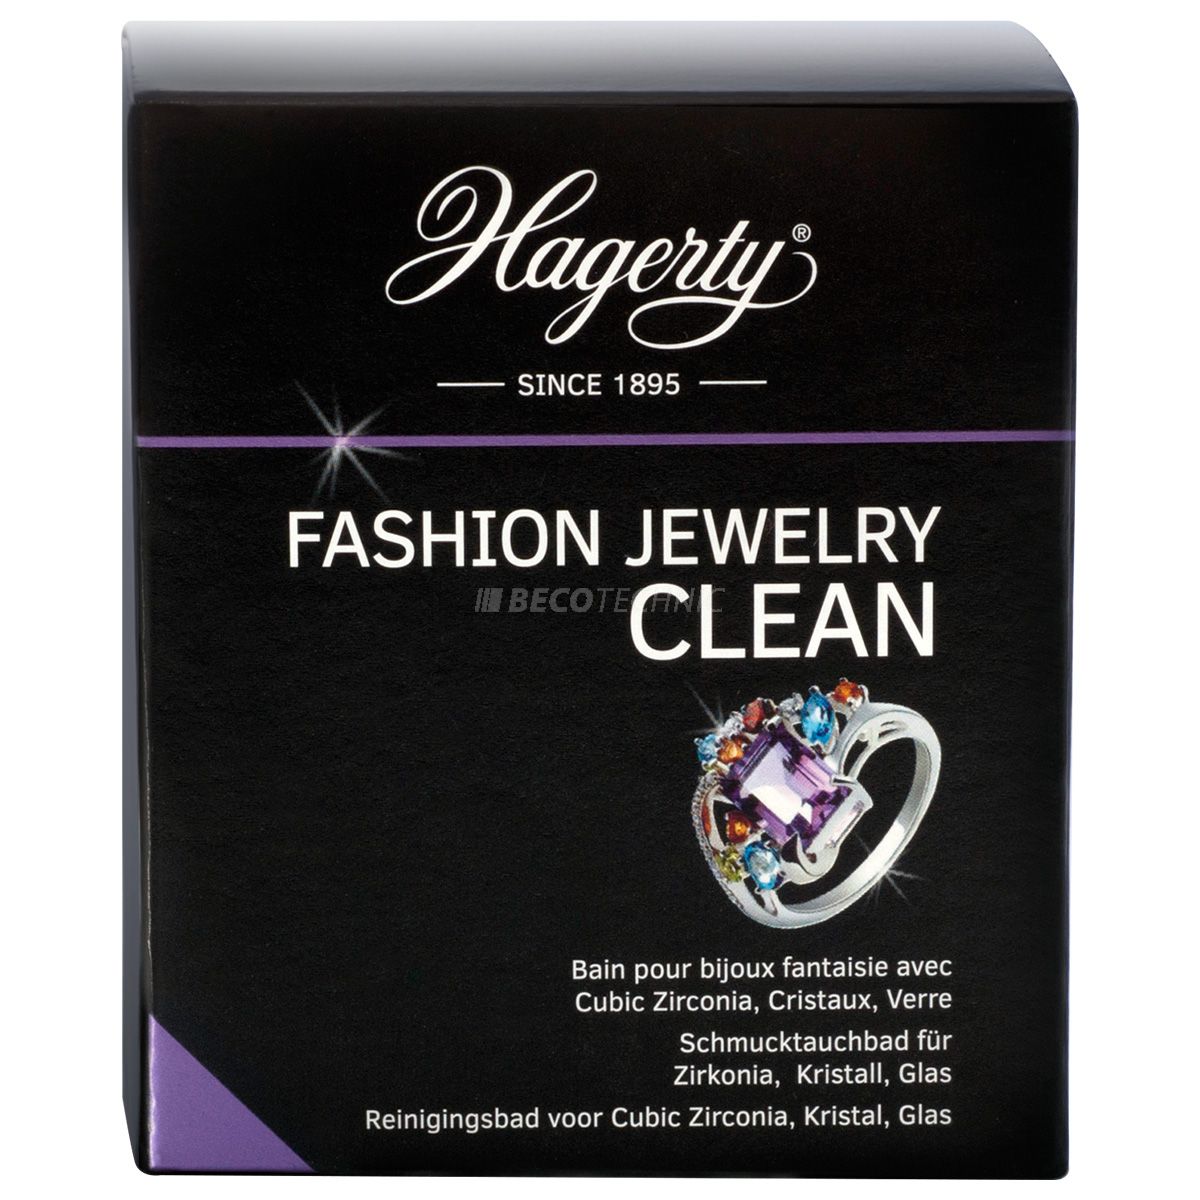 Hagerty Fashion Jewelry Clean, dompelbad voor juwelen, 170 ml